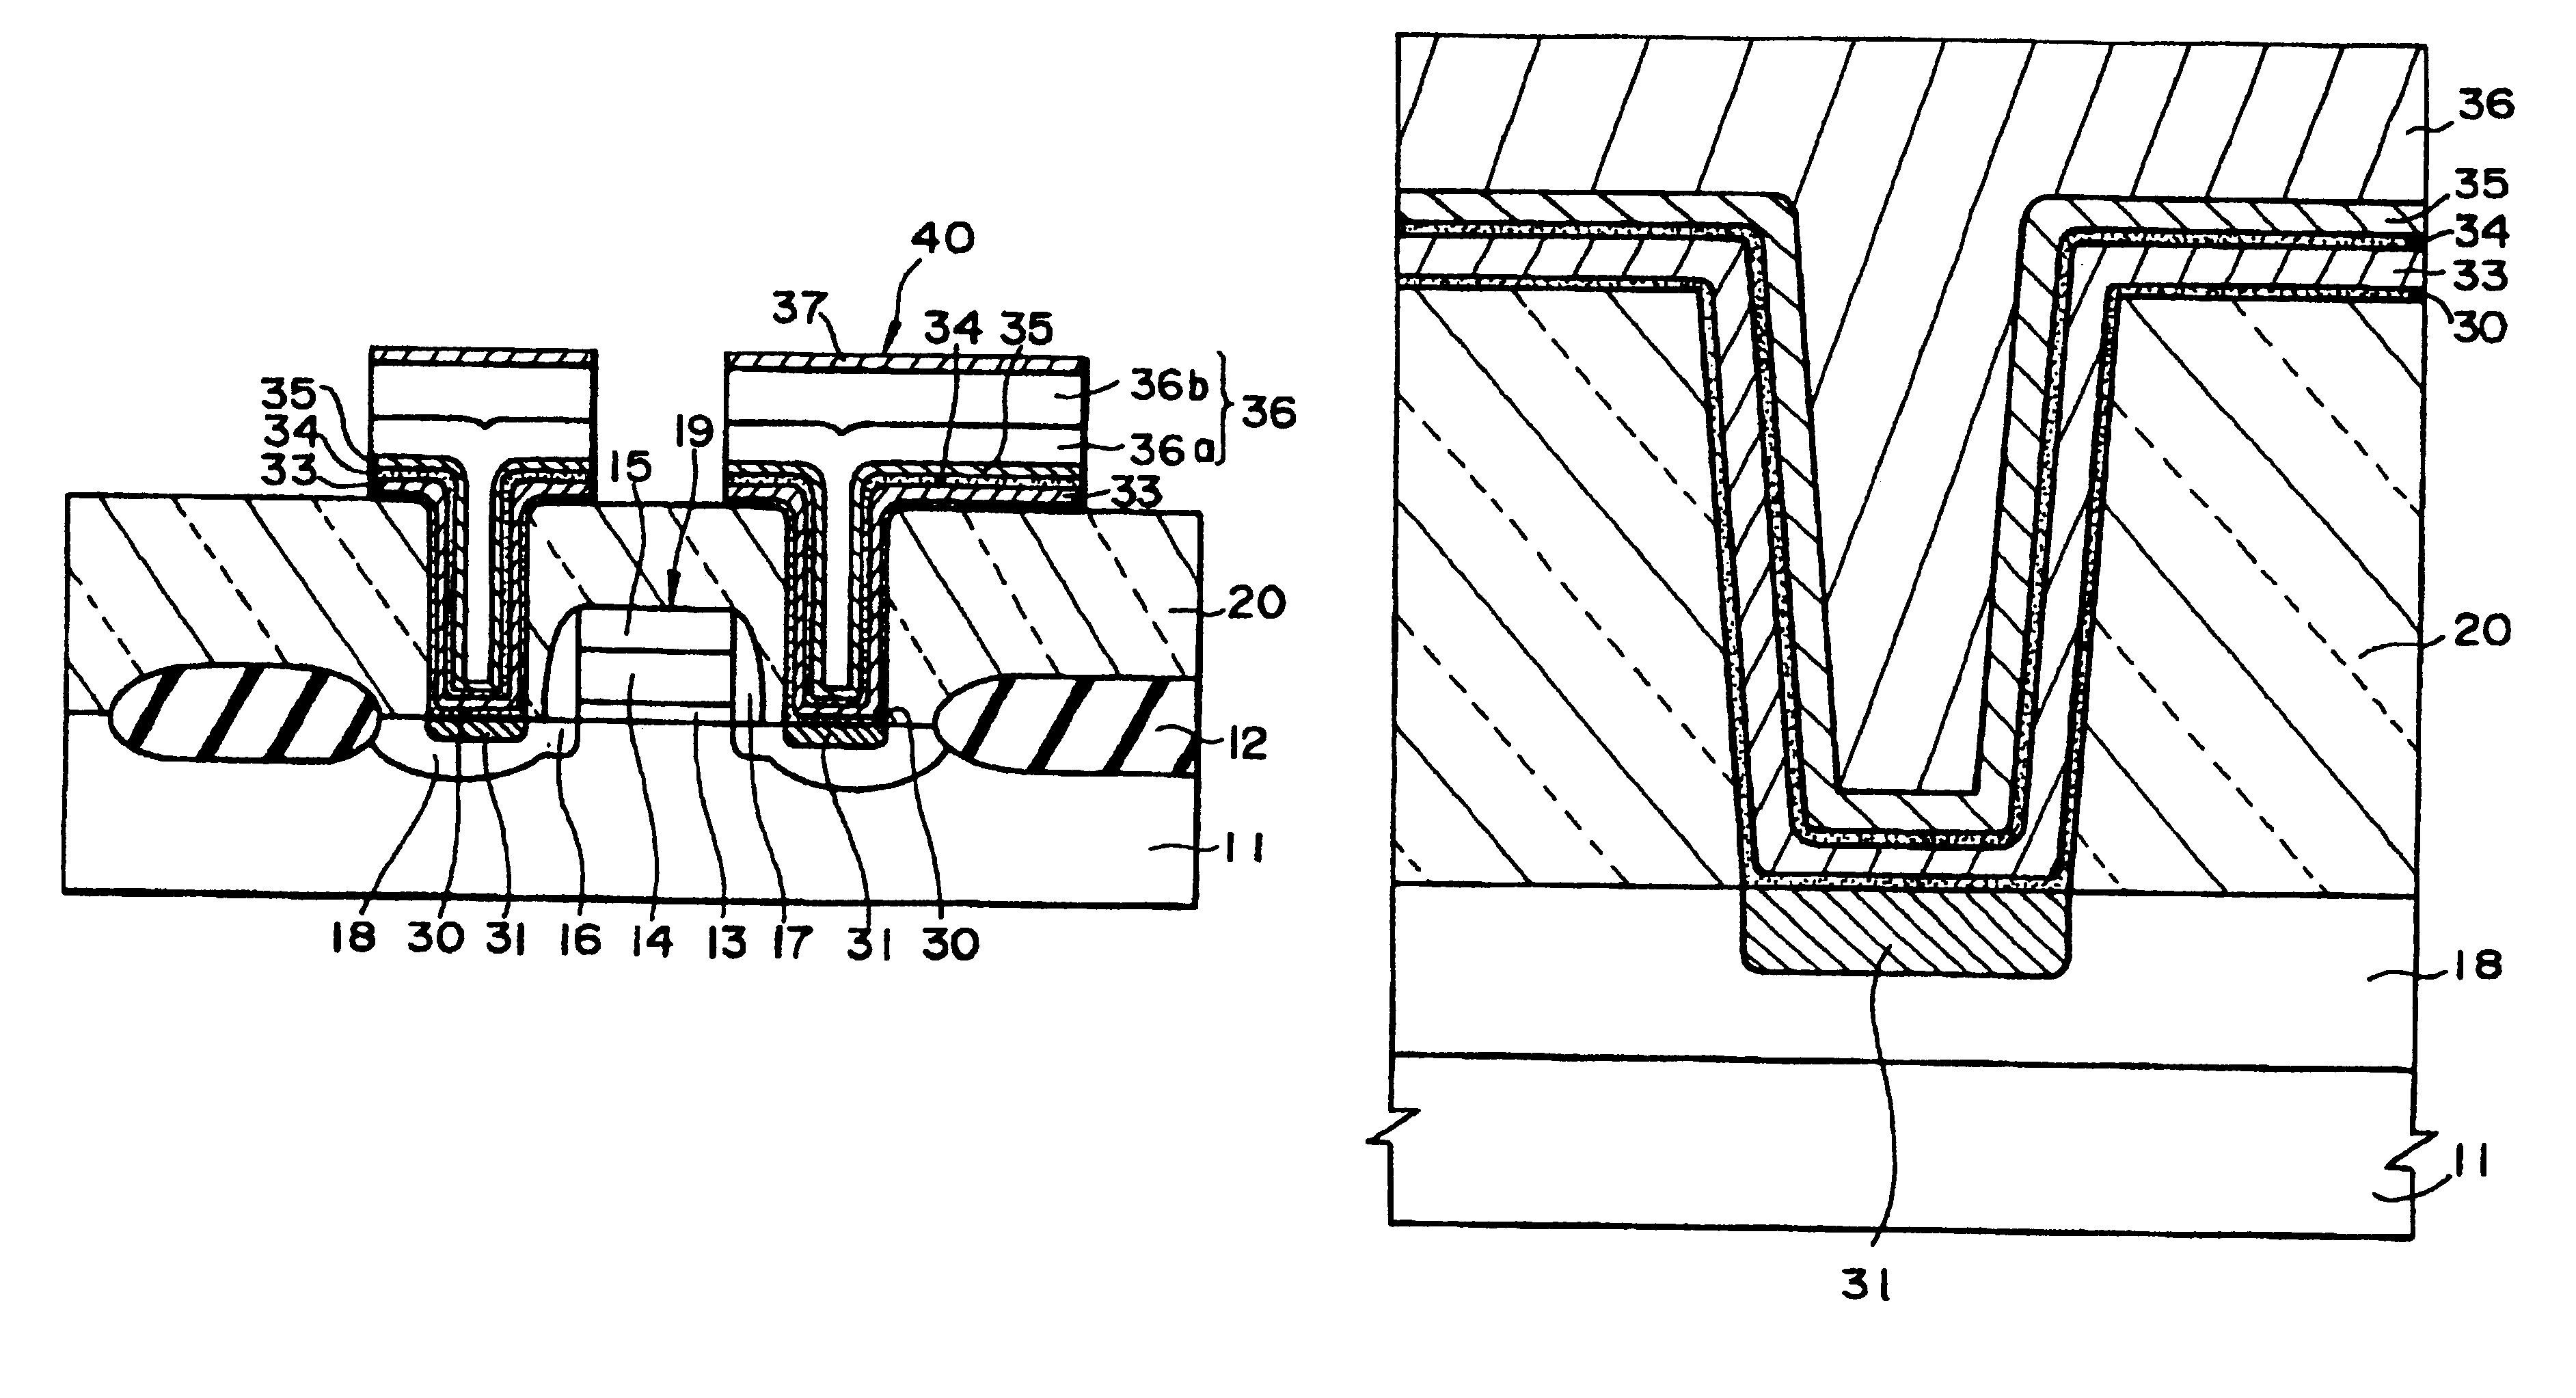 Method for manufacturing semiconductor devices